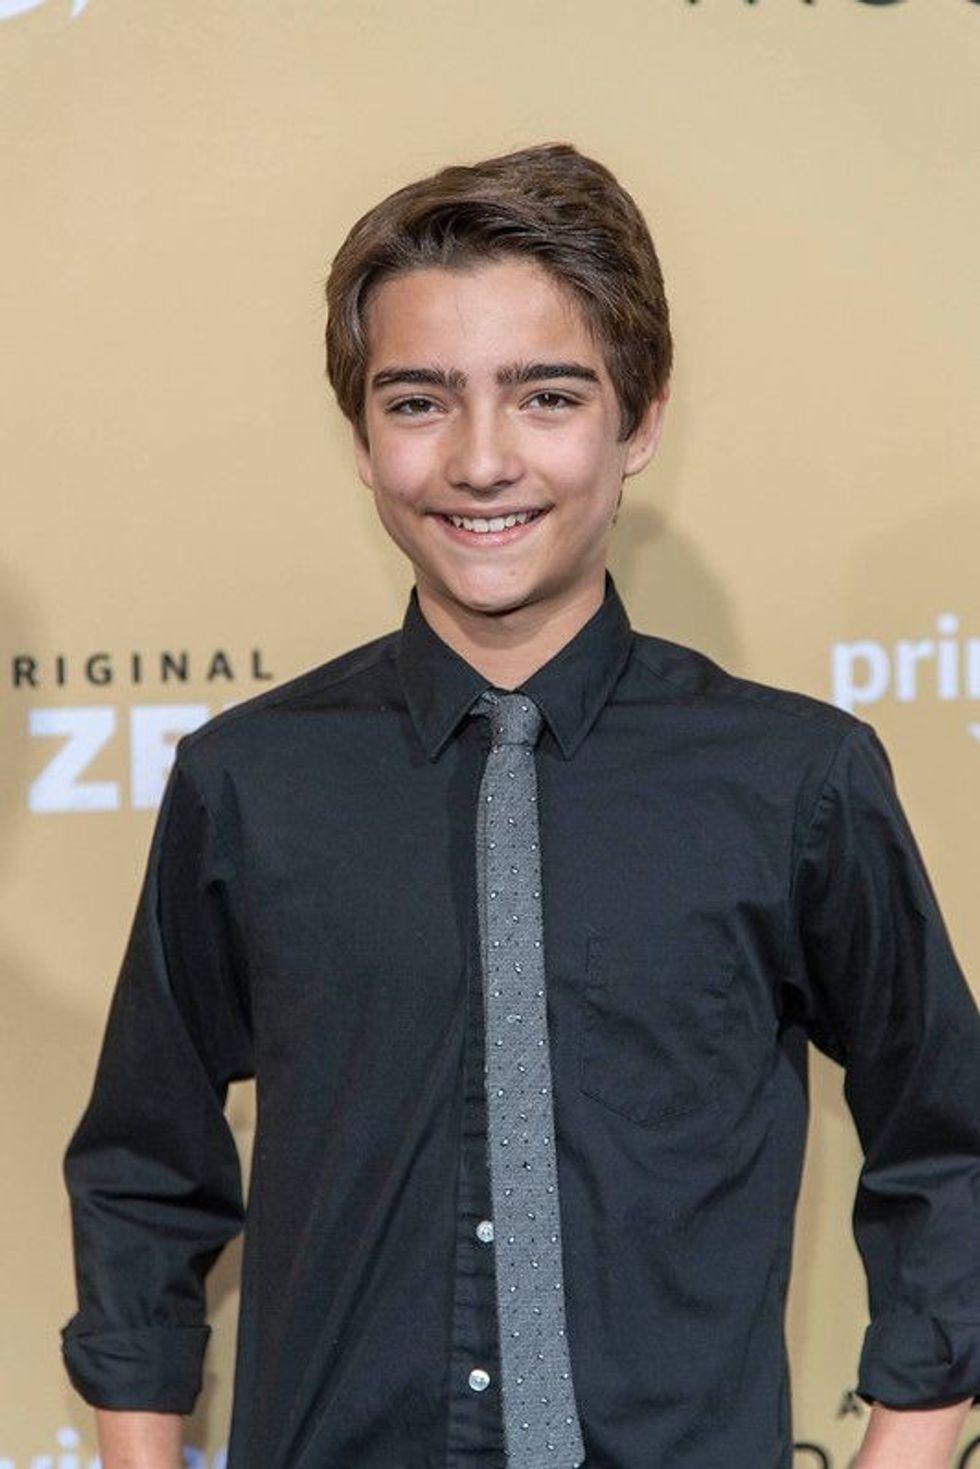 Elias Harger is an American child actor.